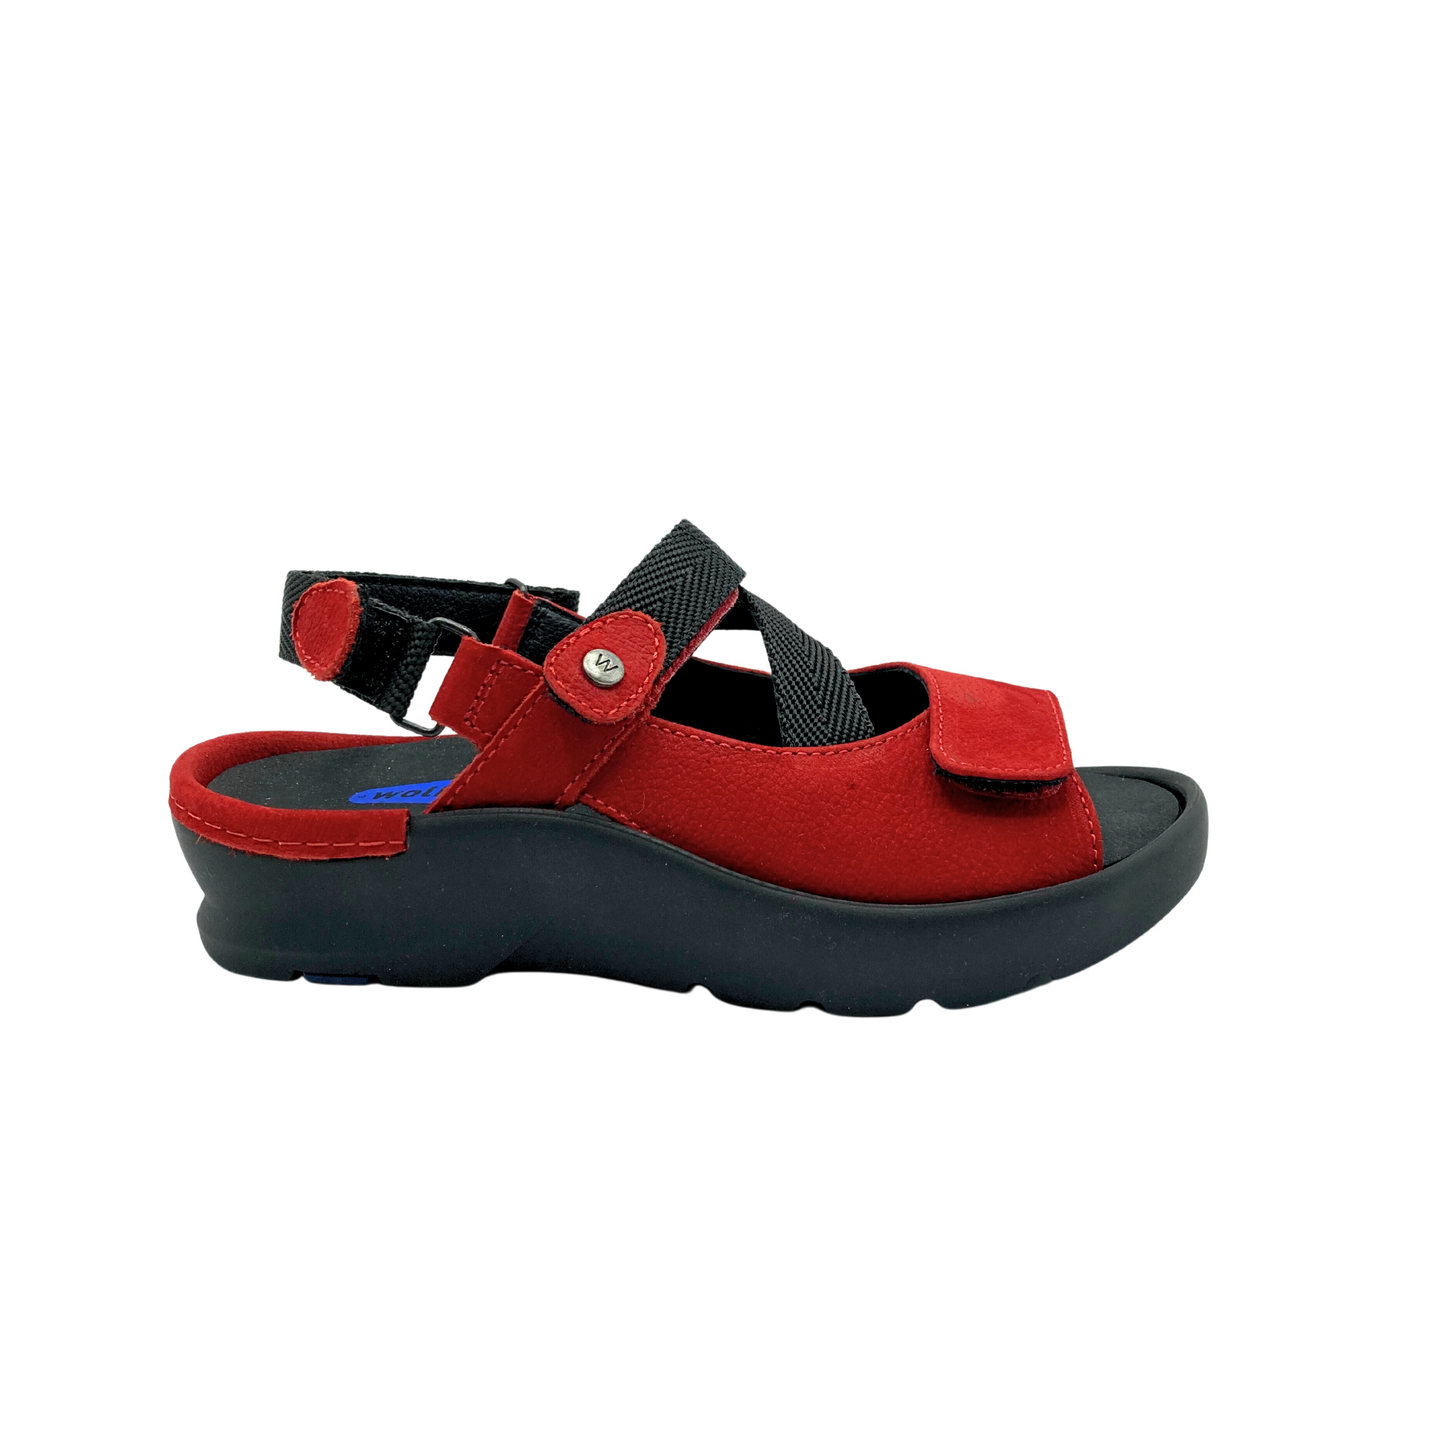 Outside view of a red leather sandal.  Ergonomic footbed is removable.